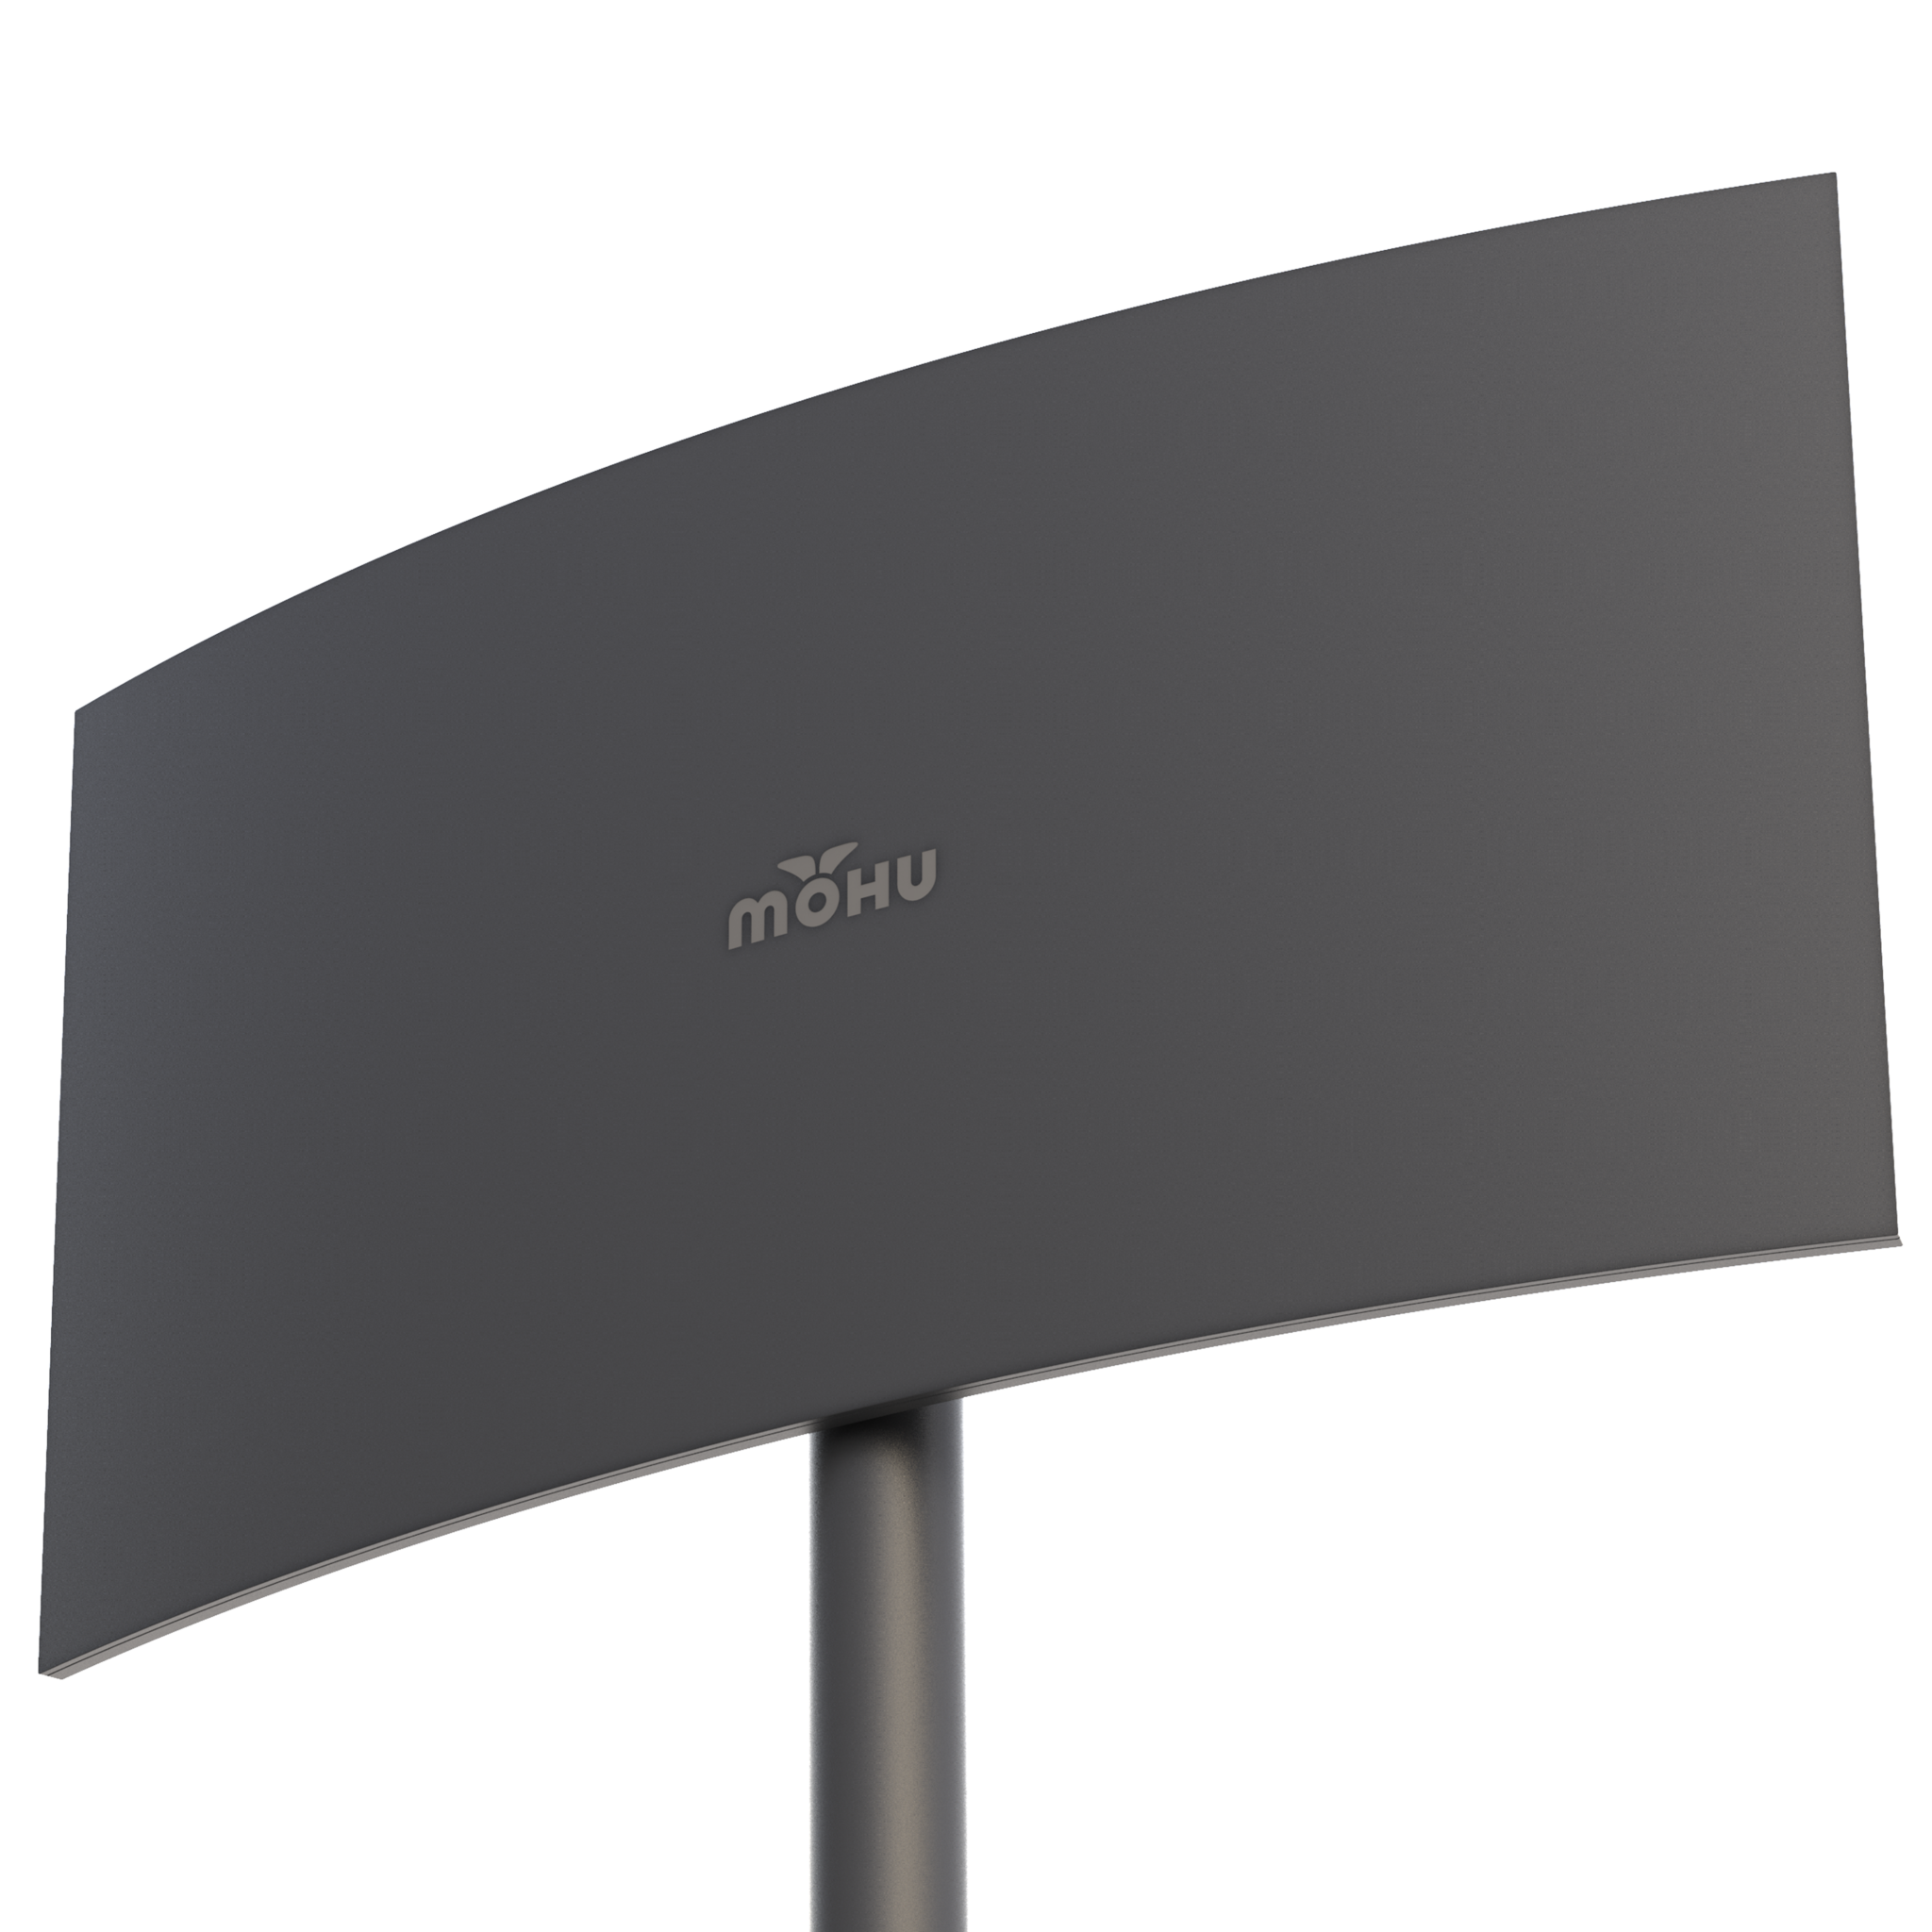 Mohu Introduces a New Antenna Amplifier For Better OTA Signal